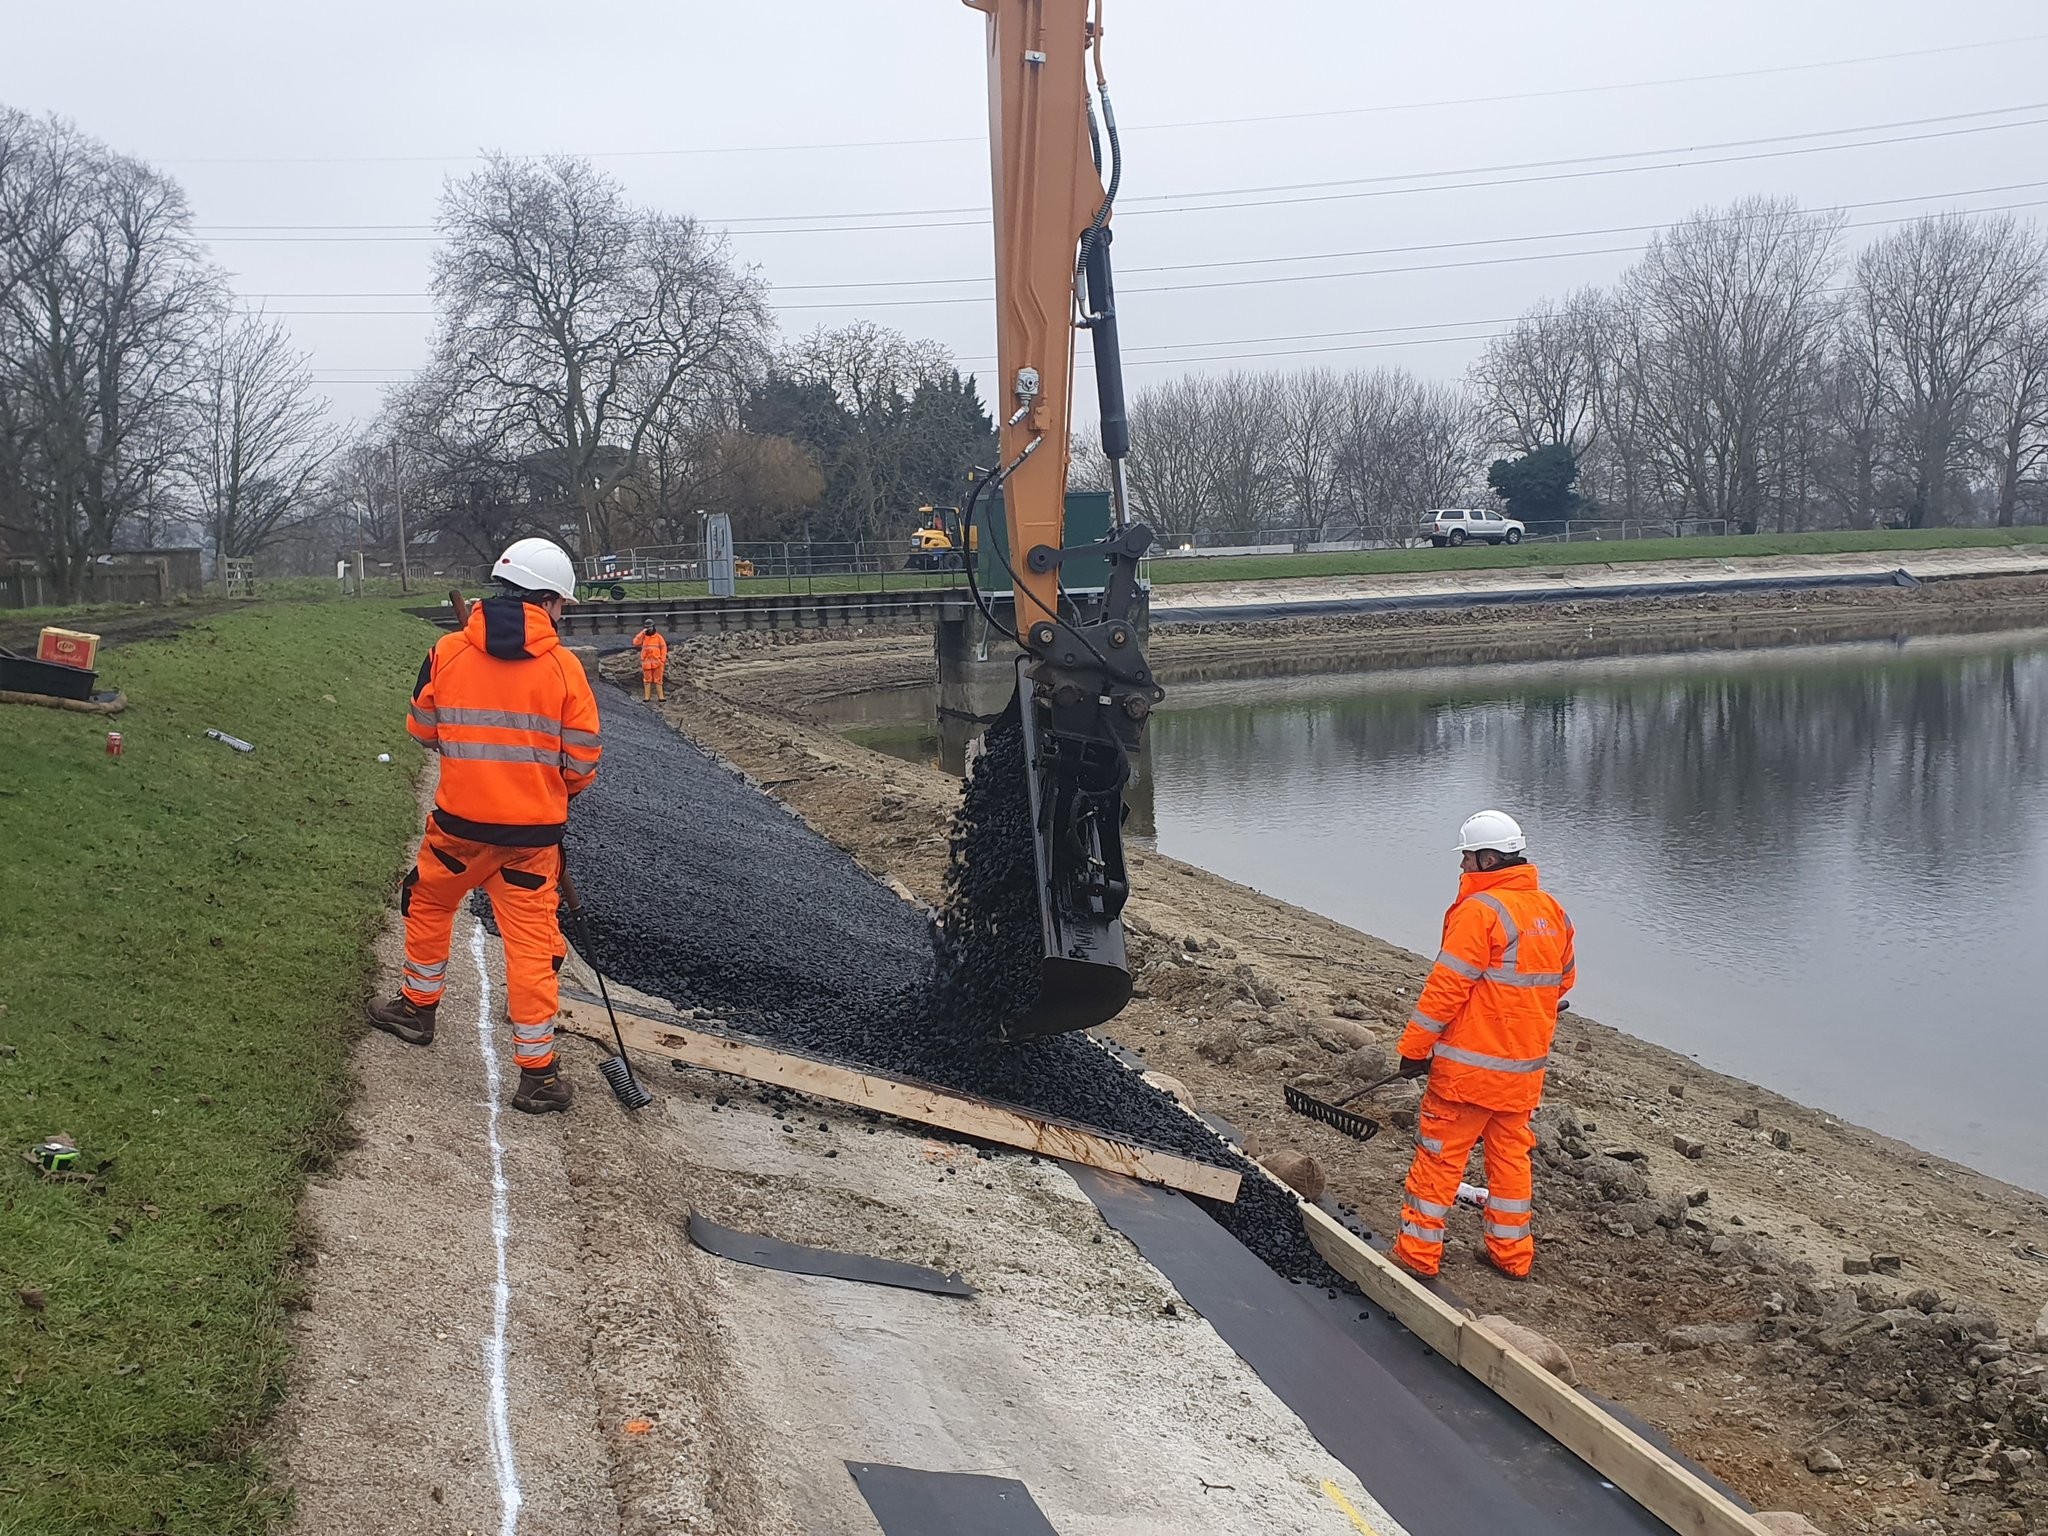 Working on the Walthamstow Reservoirs for Thames Water and Costain